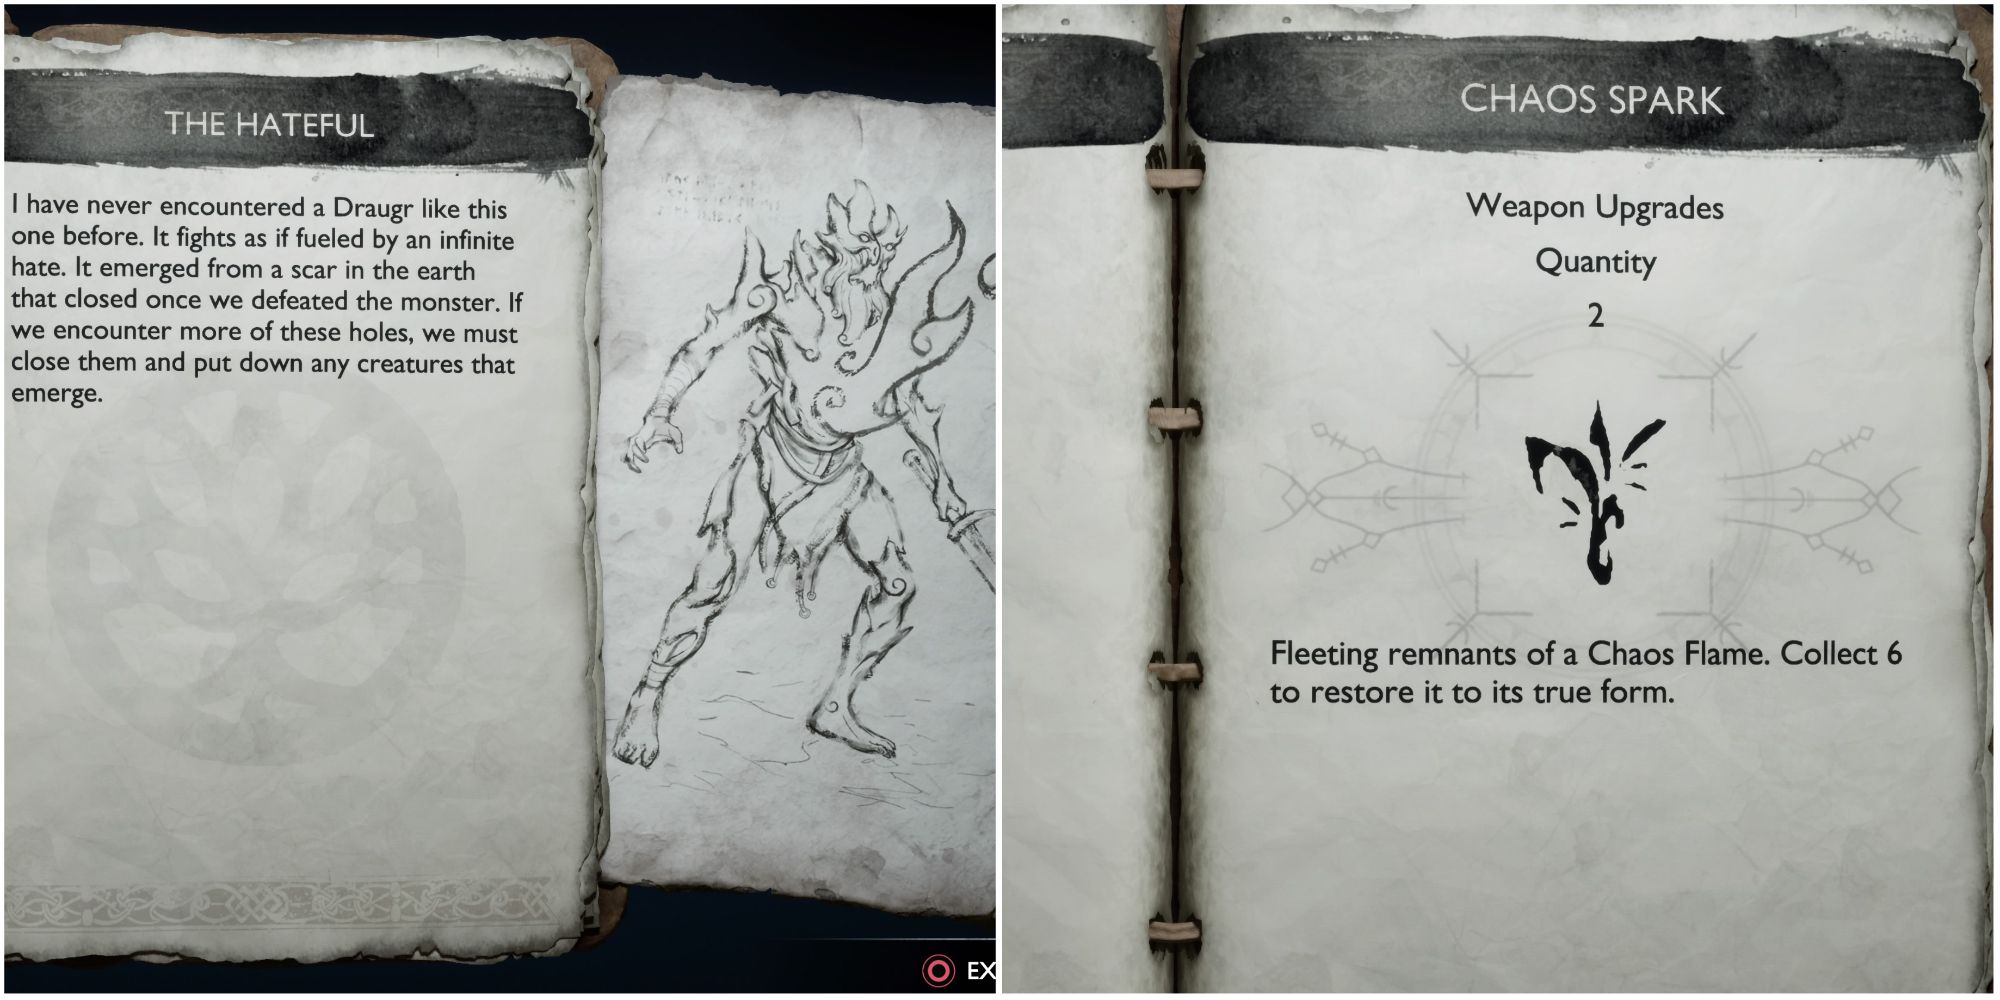 Split image showing information on The Hateful and Chaos Spark.